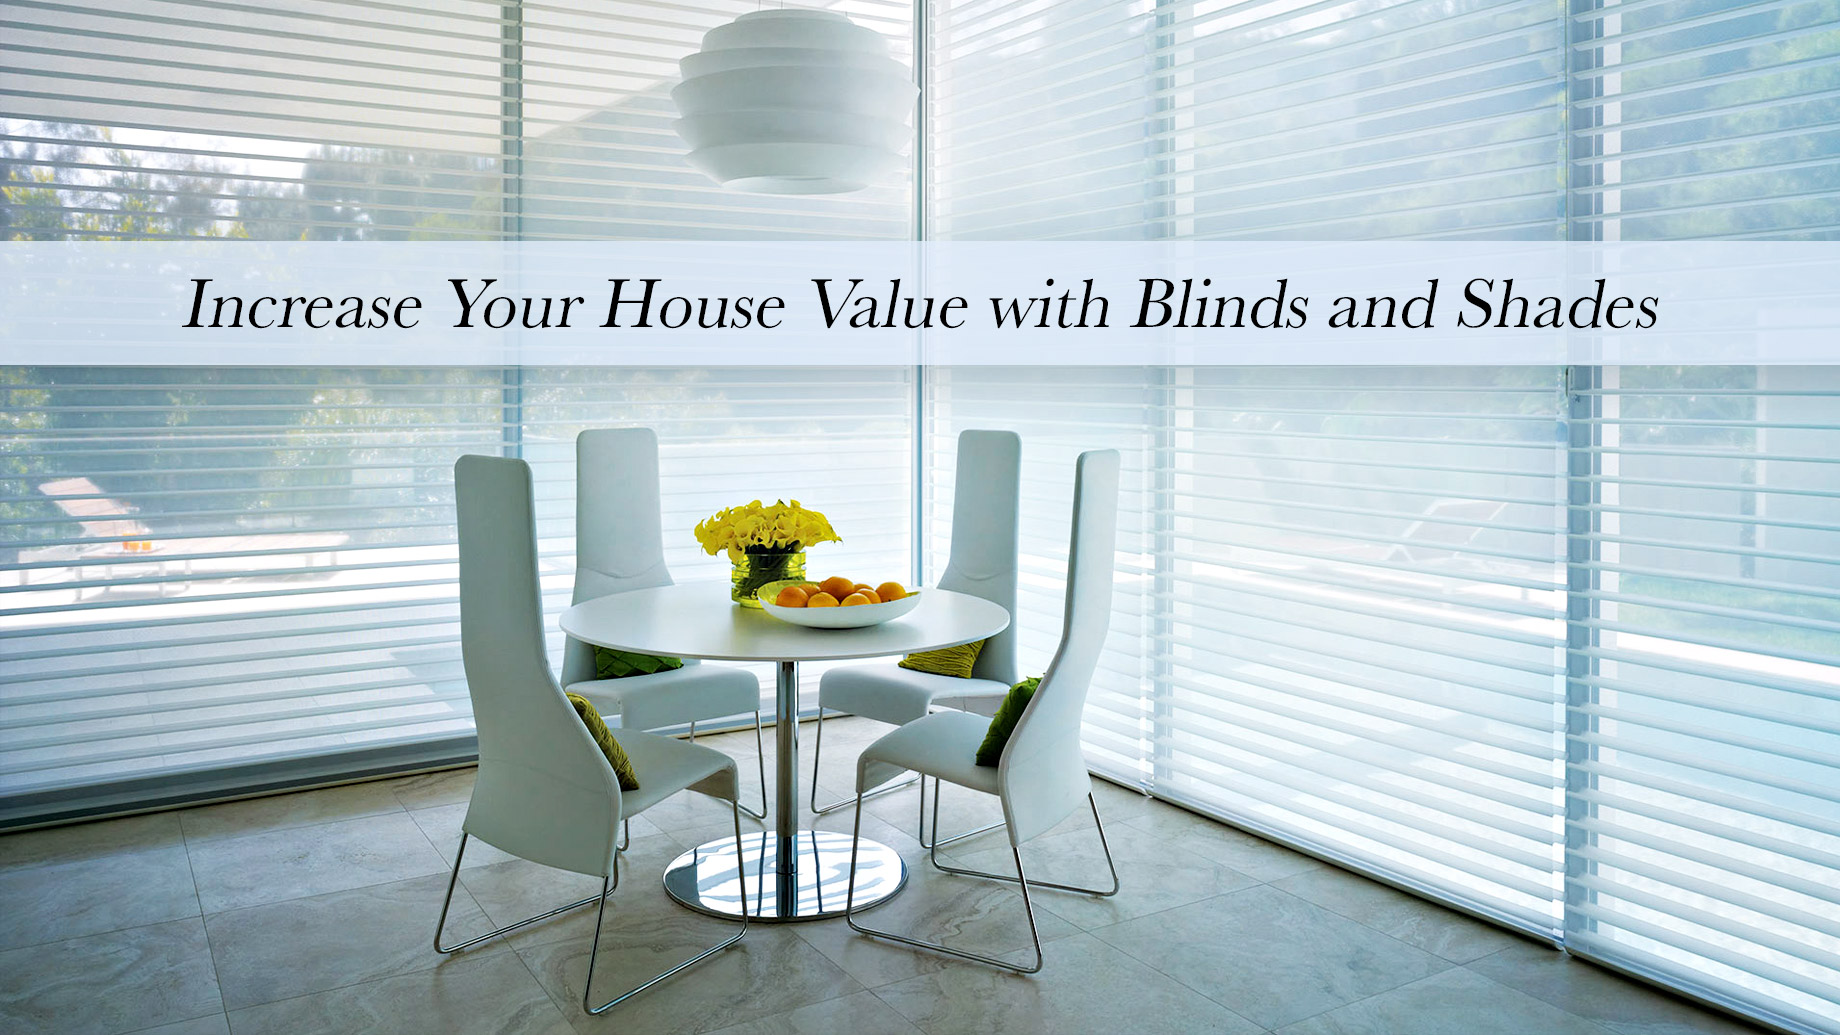 Increase Your House Value with Blinds and Shades